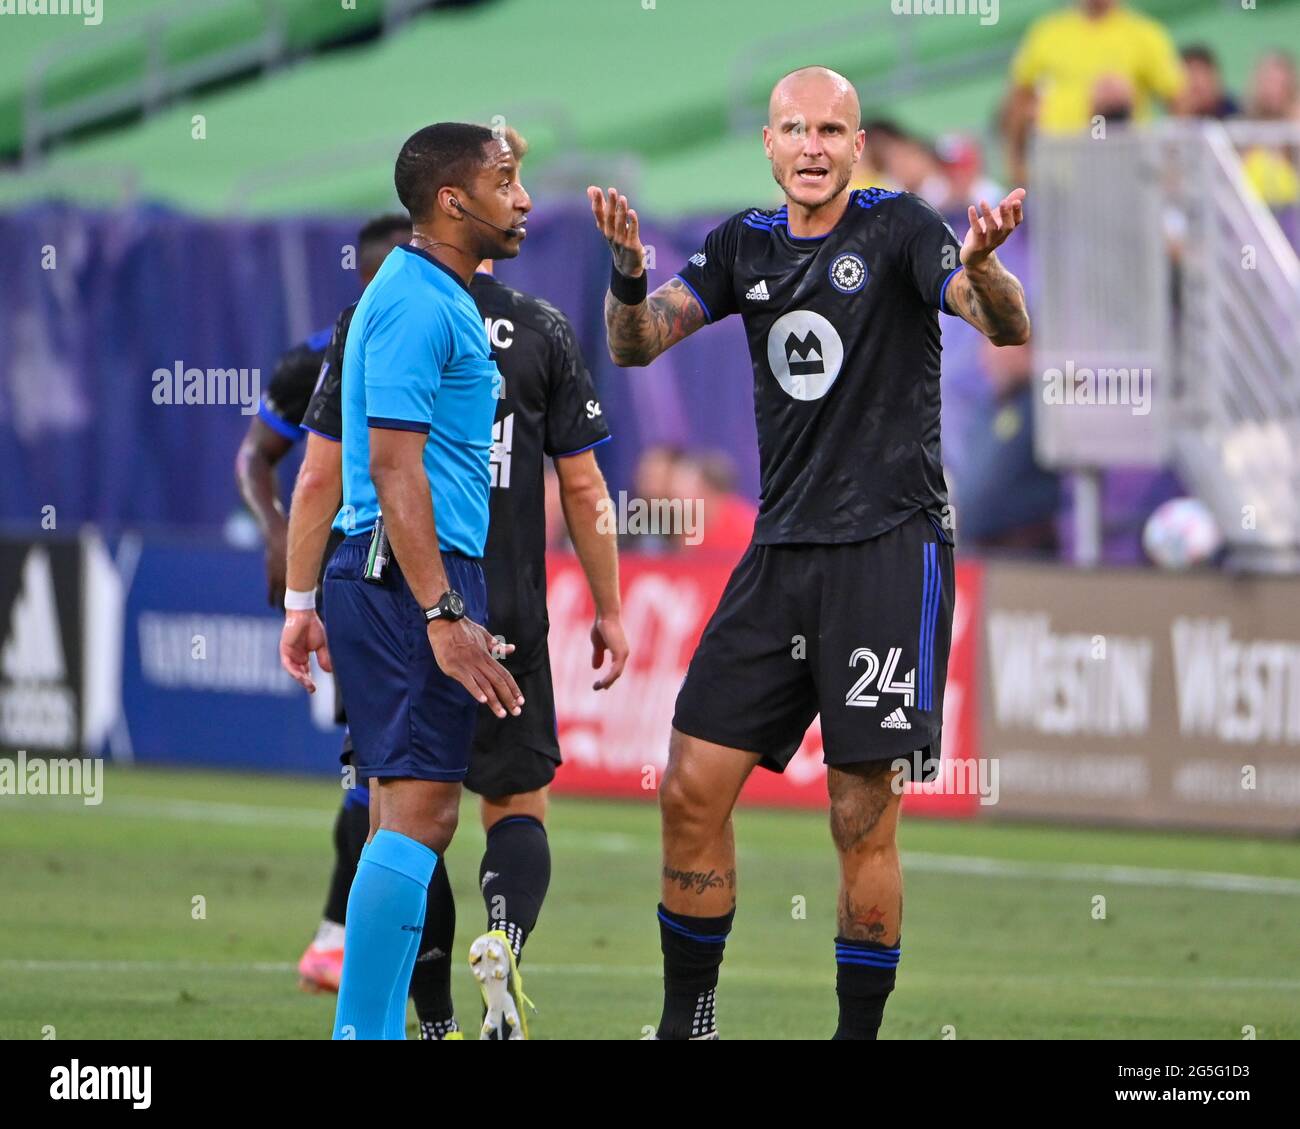 Nashville, TN, USA. 26th June, 2021. Montreal defender, Kiki Struna (24), reacts to a call by the referee during the MLS match between CF Montreal and Nashville SC at Nissan Stadium in Nashville, TN. Kevin Langley/CSM/Alamy Live News Stock Photo